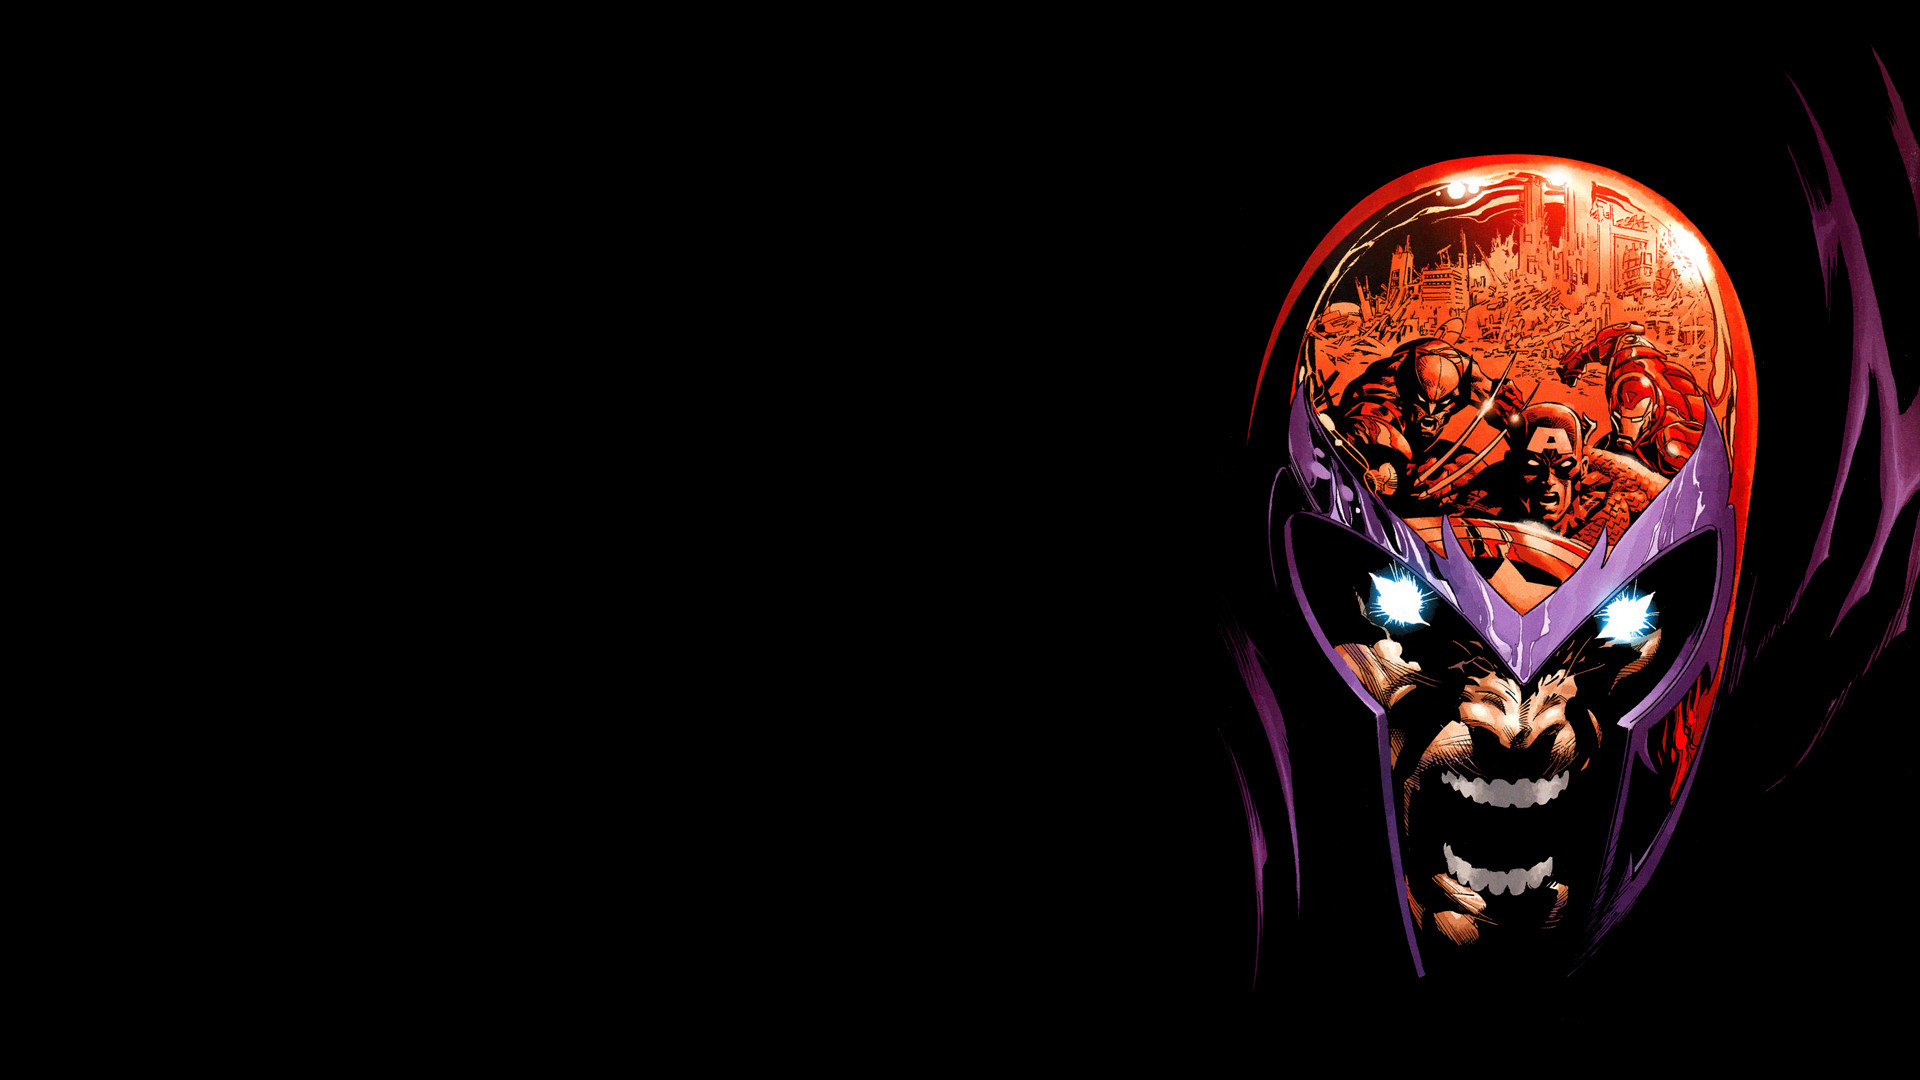 1920x1080 ... x men wallpaper hd wallpapers backgrounds of your choice ...